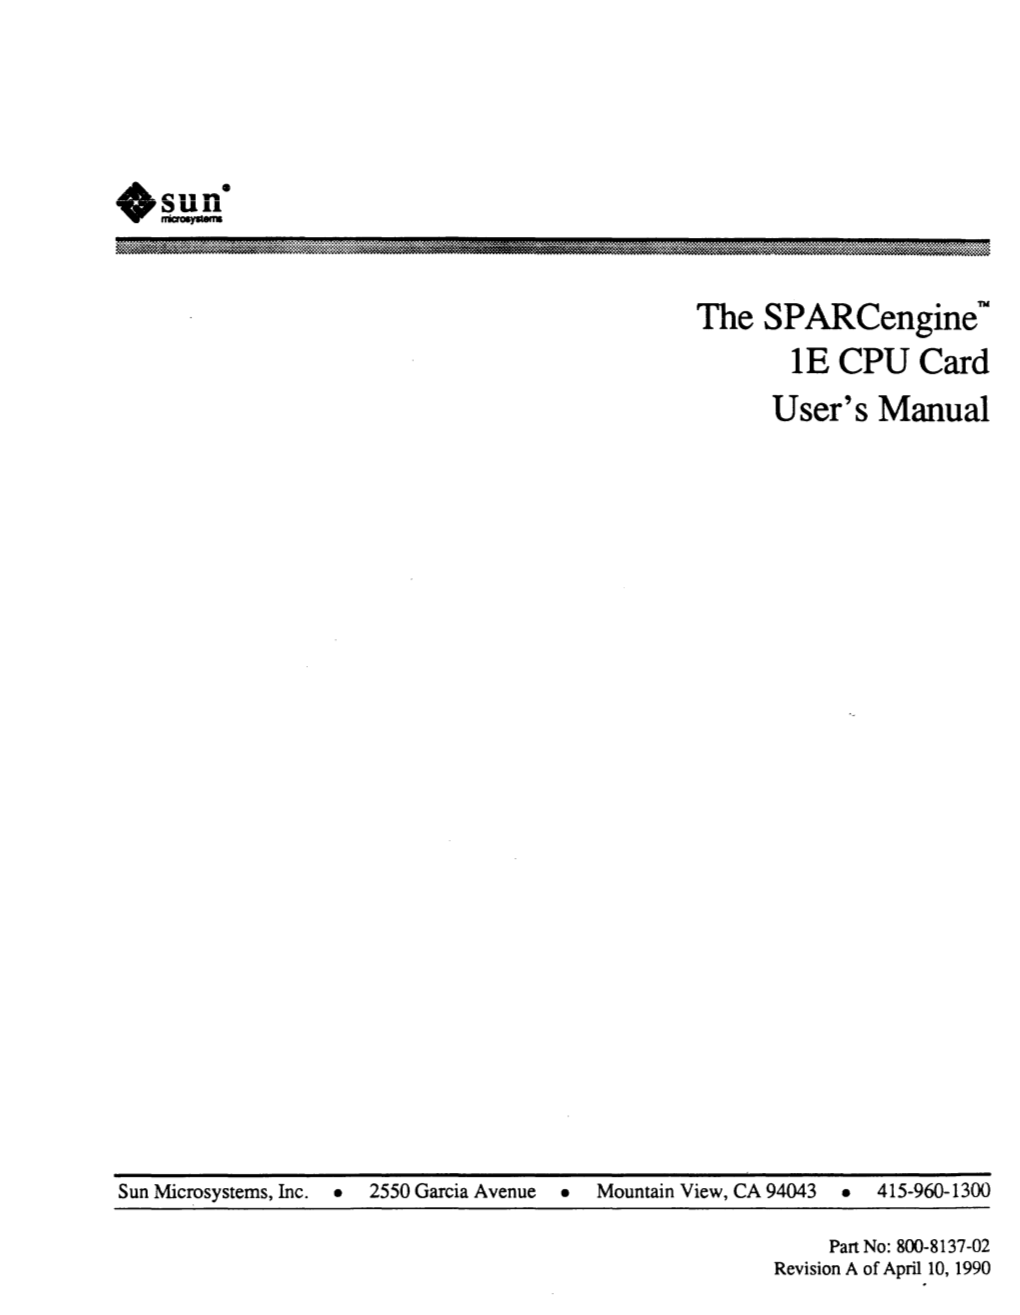 The Sparcenginetw IE CPU Card User's Manual